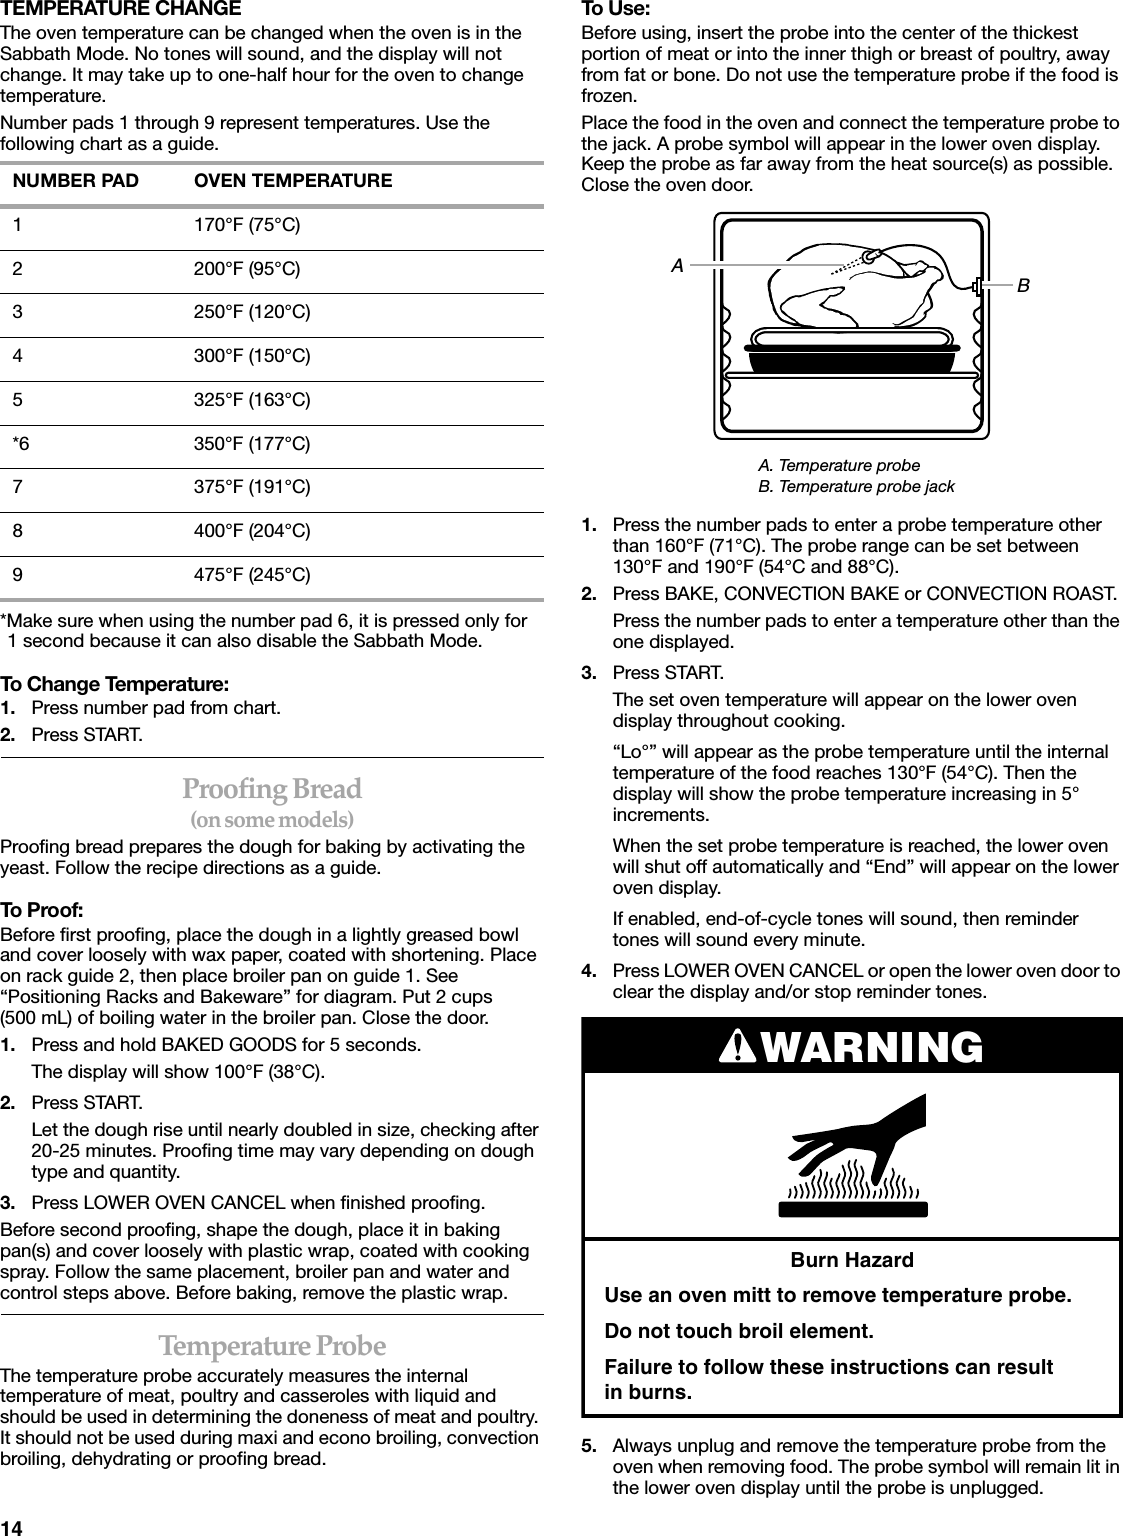 14TEMPERATURE CHANGEThe oven temperature can be changed when the oven is in the Sabbath Mode. No tones will sound, and the display will not change. It may take up to one-half hour for the oven to change temperature.Number pads 1 through 9 represent temperatures. Use the following chart as a guide.*Make sure when using the number pad 6, it is pressed only for1 second because it can also disable the Sabbath Mode.To Change Temperature:1. Press number pad from chart.2. Press START.Proofing Bread(on some models)Proofing bread prepares the dough for baking by activating the yeast. Follow the recipe directions as a guide.To Proof:Before first proofing, place the dough in a lightly greased bowl and cover loosely with wax paper, coated with shortening. Place on rack guide 2, then place broiler pan on guide 1. See “Positioning Racks and Bakeware” for diagram. Put 2 cups(500 mL) of boiling water in the broiler pan. Close the door.1. Press and hold BAKED GOODS for 5 seconds.The display will show 100°F (38°C).2. Press START.Let the dough rise until nearly doubled in size, checking after 20-25 minutes. Proofing time may vary depending on dough type and quantity.3. Press LOWER OVEN CANCEL when finished proofing.Before second proofing, shape the dough, place it in baking pan(s) and cover loosely with plastic wrap, coated with cooking spray. Follow the same placement, broiler pan and water and control steps above. Before baking, remove the plastic wrap.Temperature ProbeThe temperature probe accurately measures the internal temperature of meat, poultry and casseroles with liquid and should be used in determining the doneness of meat and poultry. It should not be used during maxi and econo broiling, convection broiling, dehydrating or proofing bread. To Use:Before using, insert the probe into the center of the thickest portion of meat or into the inner thigh or breast of poultry, away from fat or bone. Do not use the temperature probe if the food is frozen.Place the food in the oven and connect the temperature probe to the jack. A probe symbol will appear in the lower oven display. Keep the probe as far away from the heat source(s) as possible. Close the oven door.1. Press the number pads to enter a probe temperature other than 160°F (71°C). The probe range can be set between 130°F and 190°F (54°C and 88°C).2. Press BAKE, CONVECTION BAKE or CONVECTION ROAST.Press the number pads to enter a temperature other than the one displayed.3. Press START.The set oven temperature will appear on the lower oven display throughout cooking.“Lo°” will appear as the probe temperature until the internal temperature of the food reaches 130°F (54°C). Then the display will show the probe temperature increasing in 5° increments.When the set probe temperature is reached, the lower oven will shut off automatically and “End” will appear on the lower oven display.If enabled, end-of-cycle tones will sound, then reminder tones will sound every minute.4. Press LOWER OVEN CANCEL or open the lower oven door to clear the display and/or stop reminder tones.5. Always unplug and remove the temperature probe from the oven when removing food. The probe symbol will remain lit in the lower oven display until the probe is unplugged.NUMBER PAD OVEN TEMPERATURE1 170°F (75°C)2 200°F (95°C)3 250°F (120°C)4 300°F (150°C)5 325°F (163°C)*6 350°F (177°C)7 375°F (191°C)8 400°F (204°C)9 475°F (245°C)A. Temperature probeB. Temperature probe jackABWARNINGBurn HazardUse an oven mitt to remove temperature probe.Do not touch broil element.Failure to follow these instructions can result      in burns.